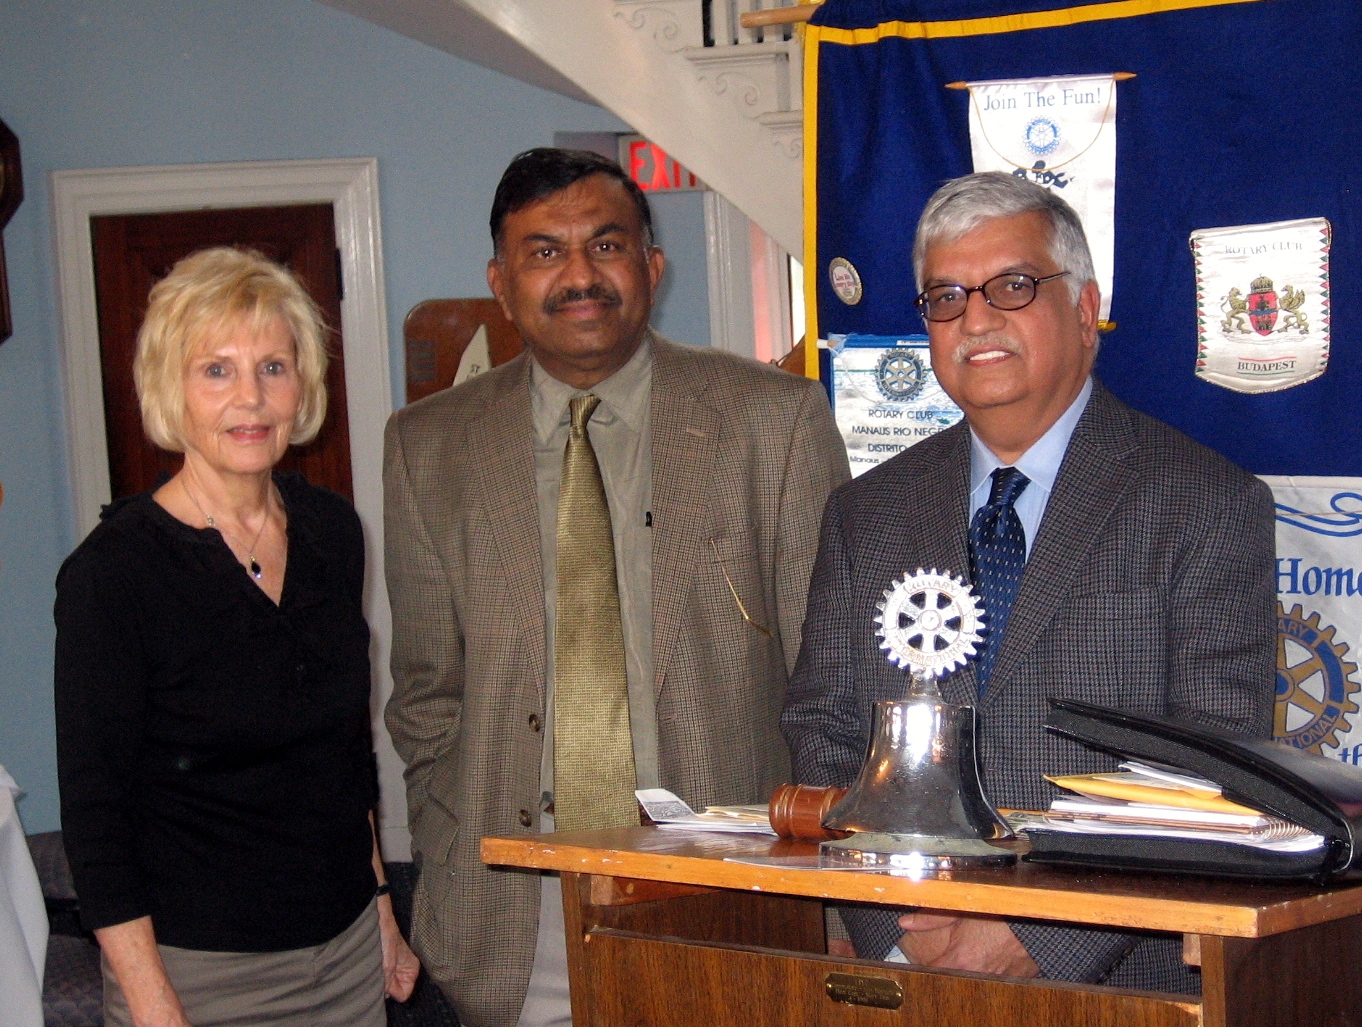 Prof. Sridhar at the Rotary Club of Babylon 2012 (L to Rotary Club President Kathy Moore, Dr Krishna Gujavarty, and Prof. S.N. Sridhar)